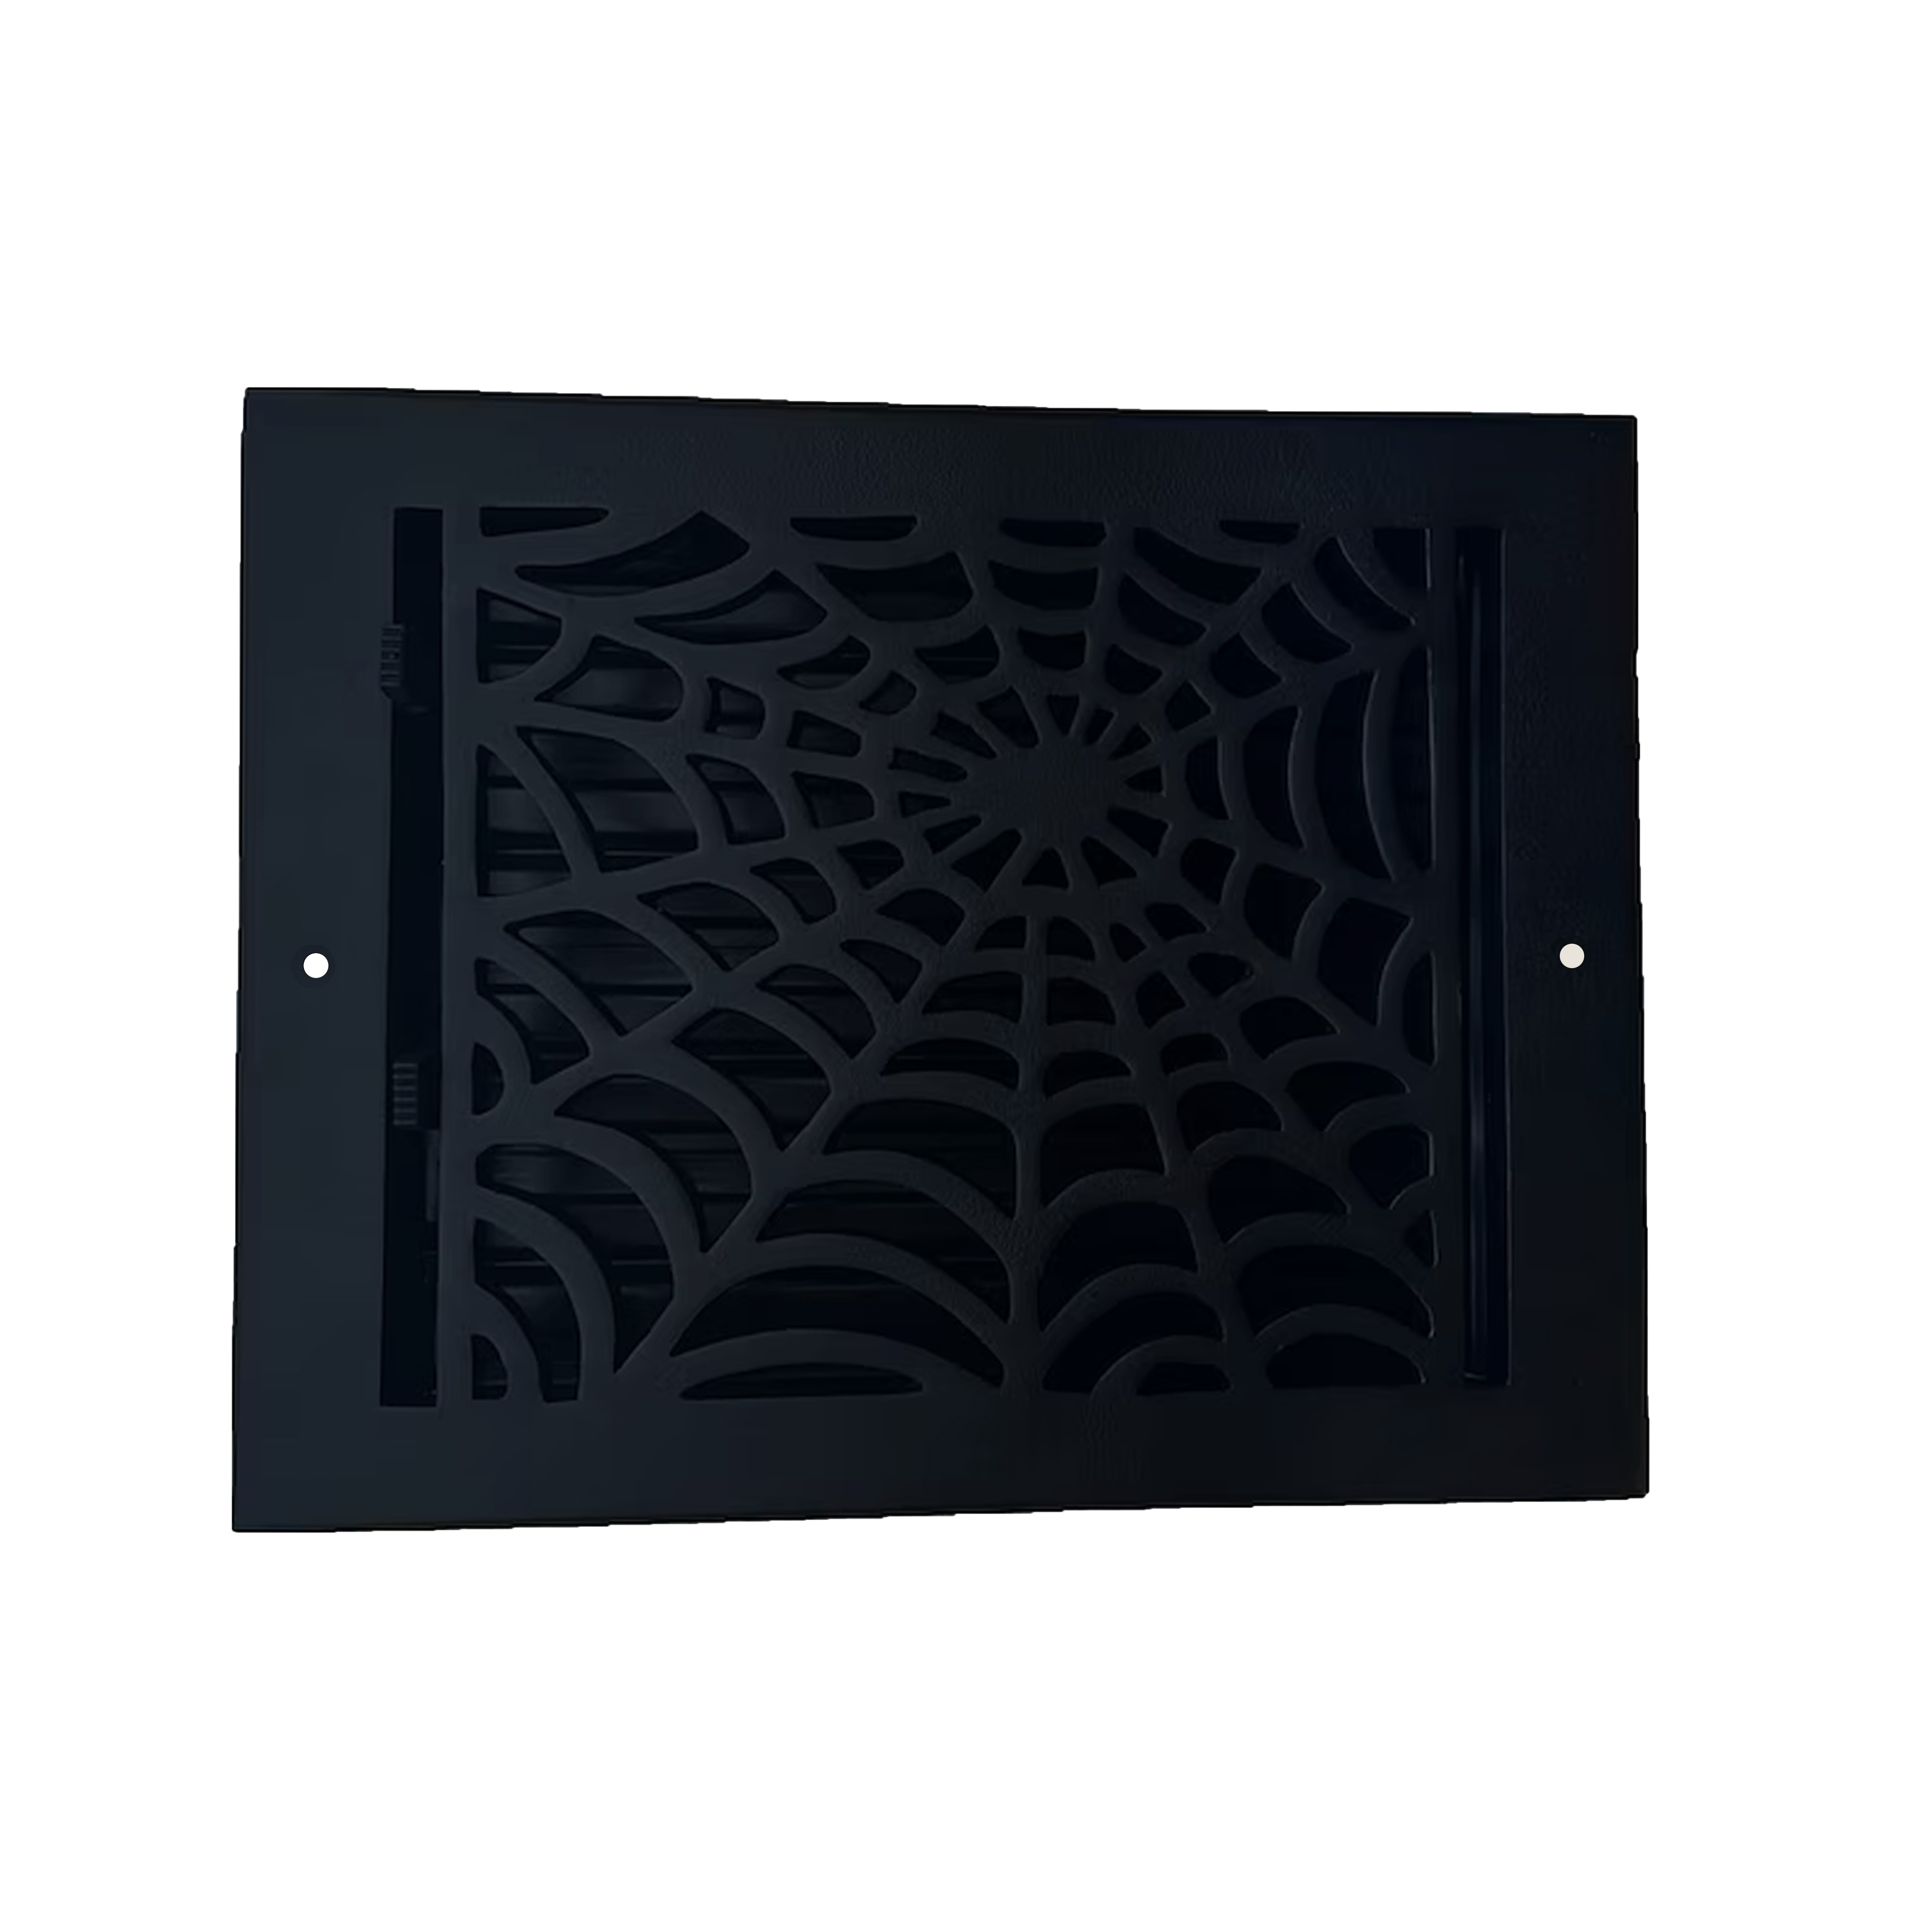 Spooky Gothic Vent cover 8"x 10" Duct Opening (Overall 9-1/2"x 11-3/4") in Spider Web Design | Solid Cast Aluminium Register Cover | Powder Coated